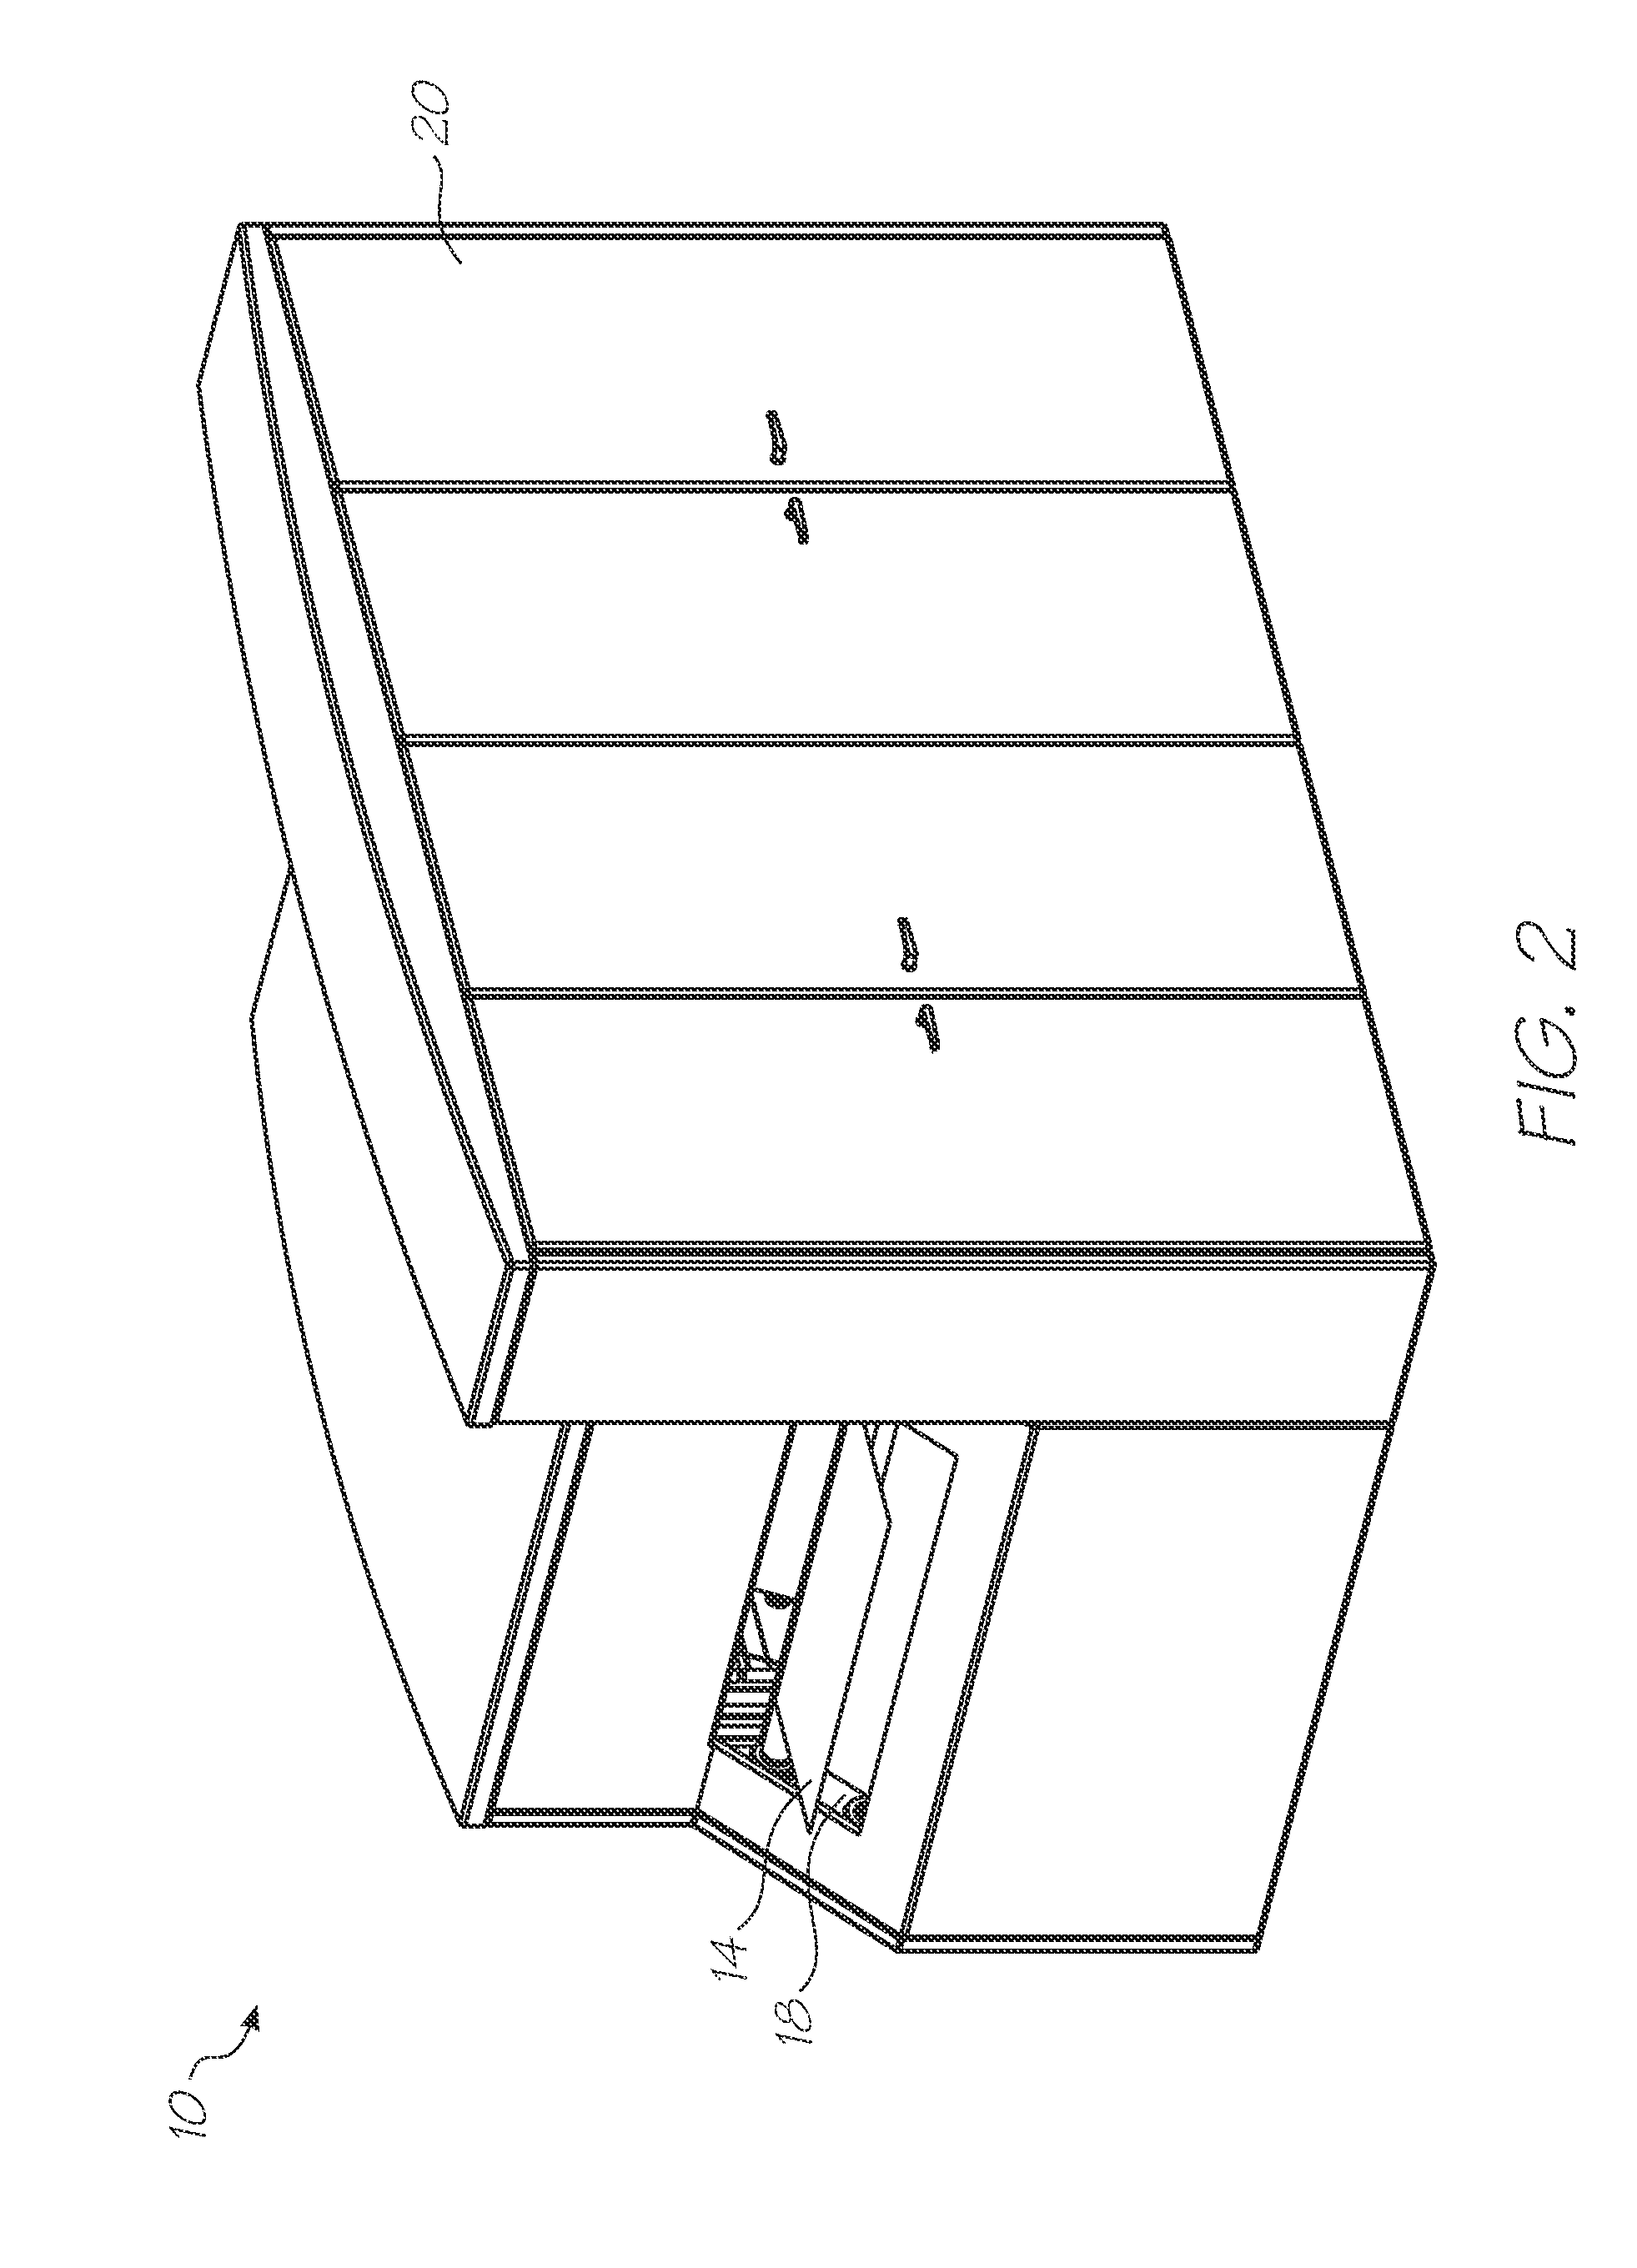 Web printer with dual print zones having opposing feed directions